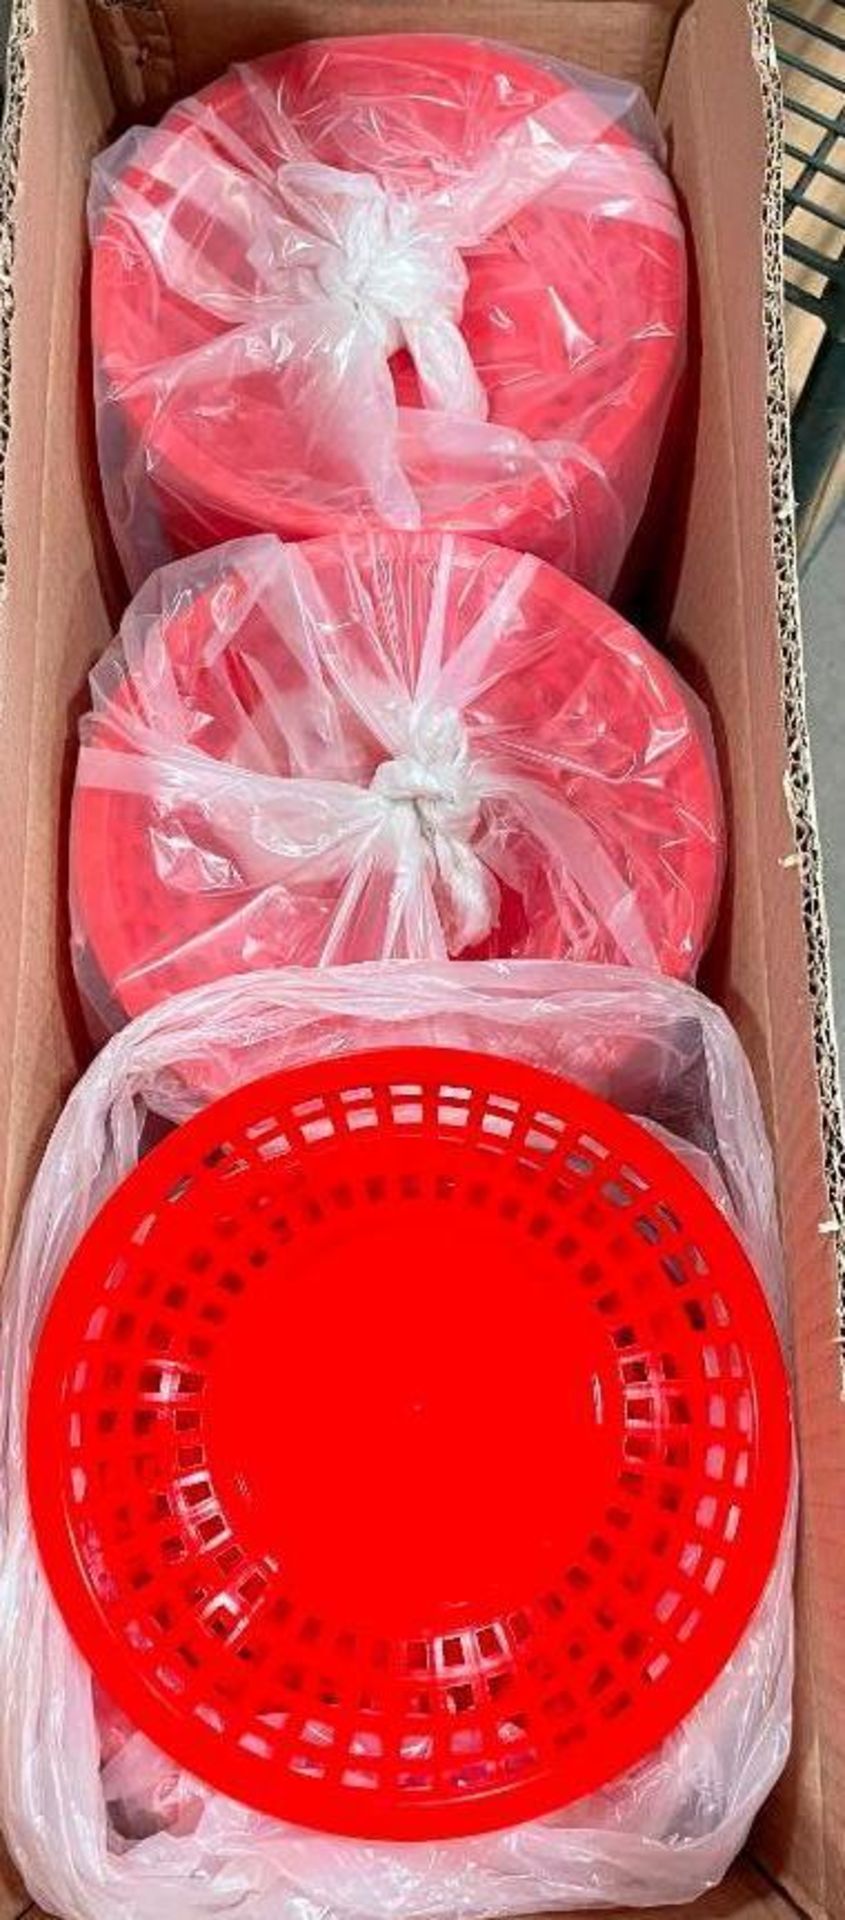 8" RED ROUND PLASTIC FOOD BASKET, JOHNSON ROSE 80752 - LOT OF 108 - NEW - Image 4 of 4